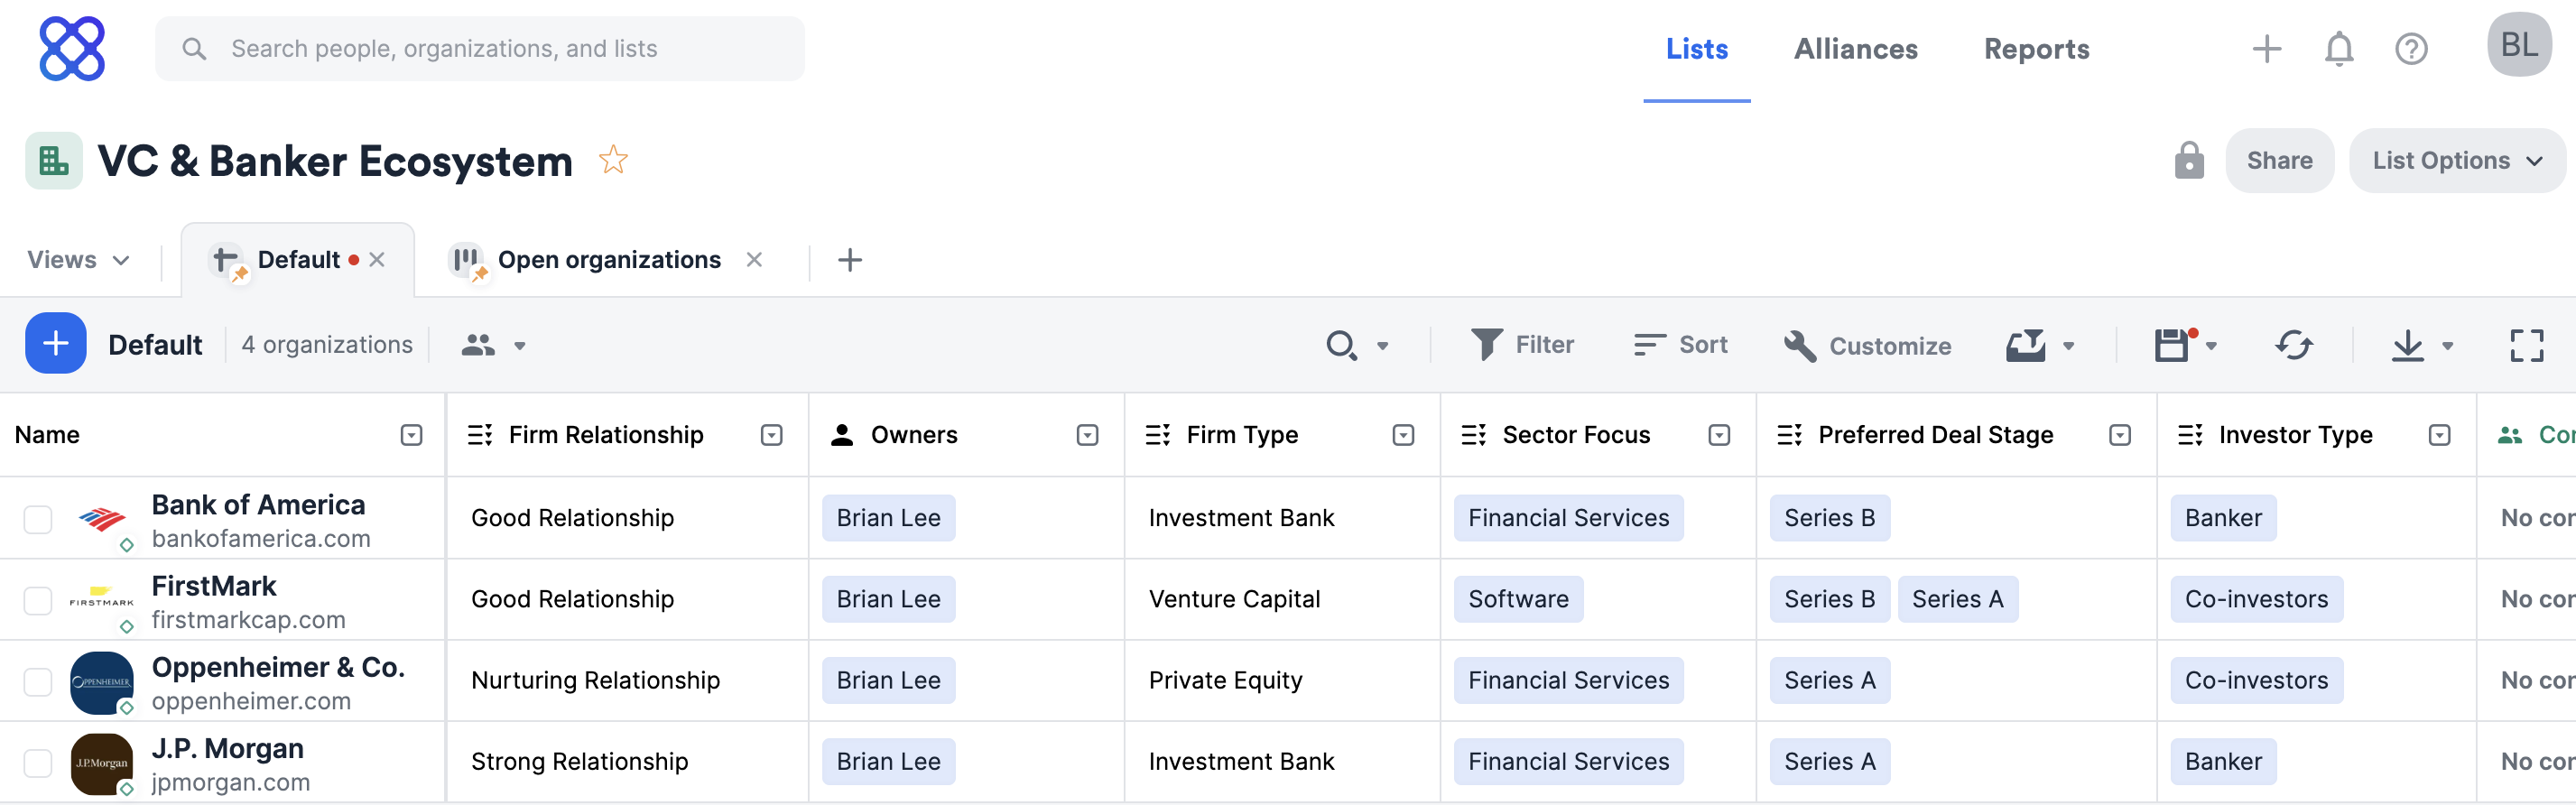 VC_and_Banker_Ecosystem_List.png